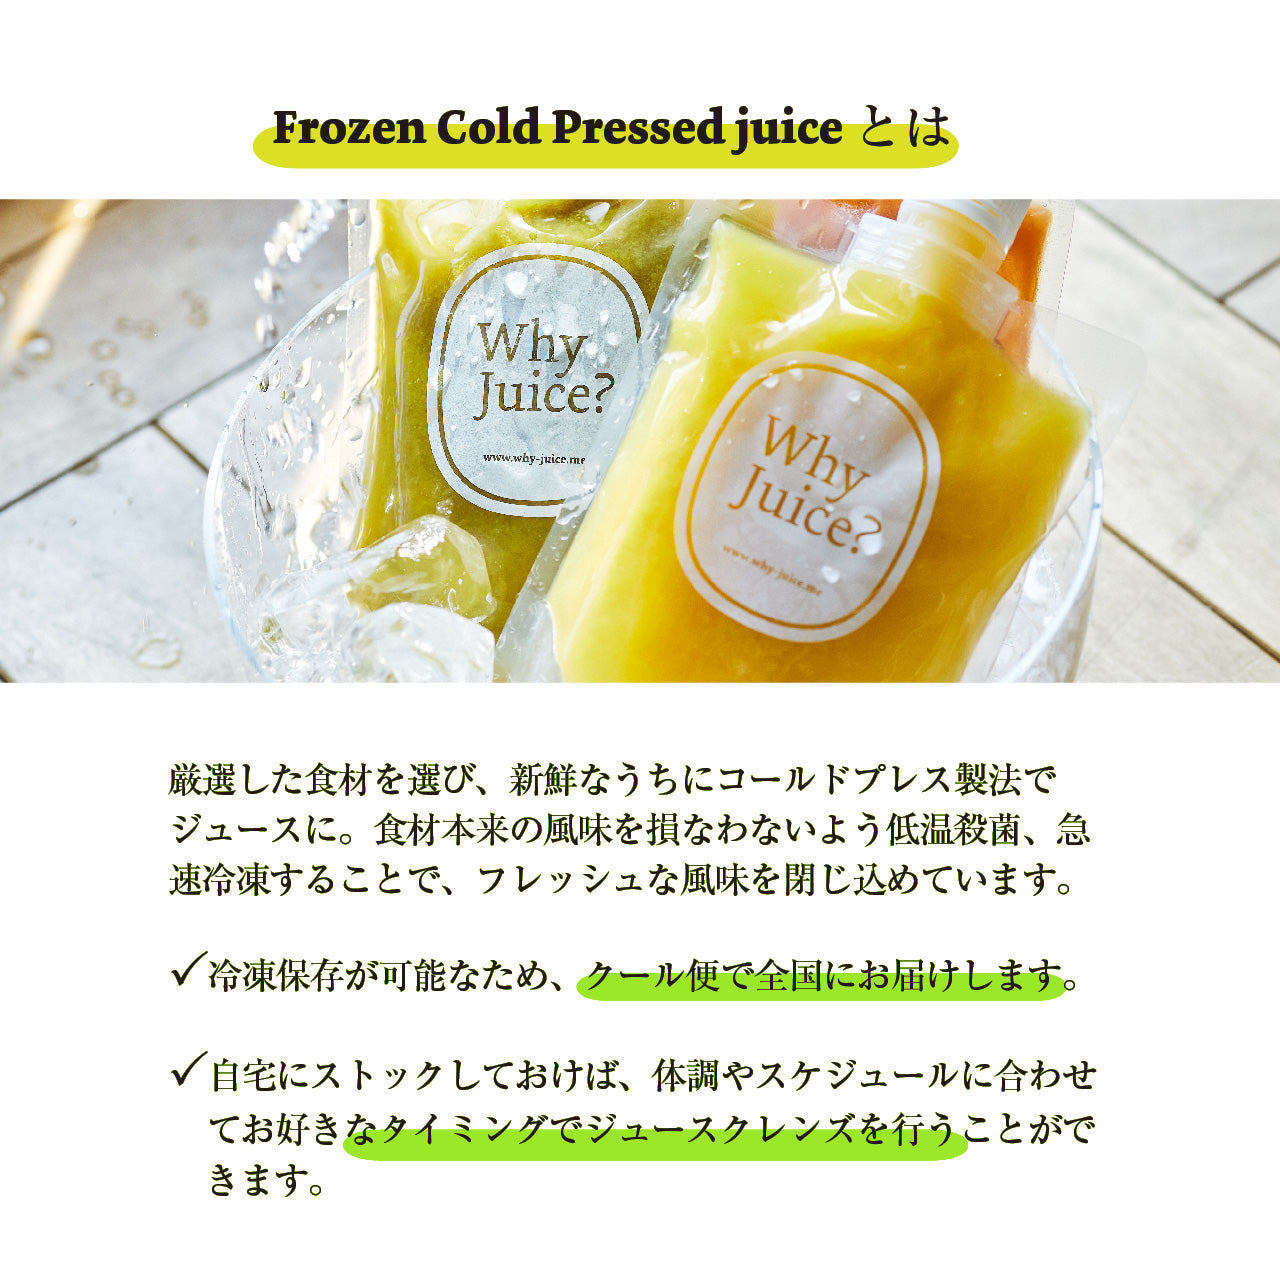 Frozen Cold Pressed Juice 【Pine Aid】6本セット